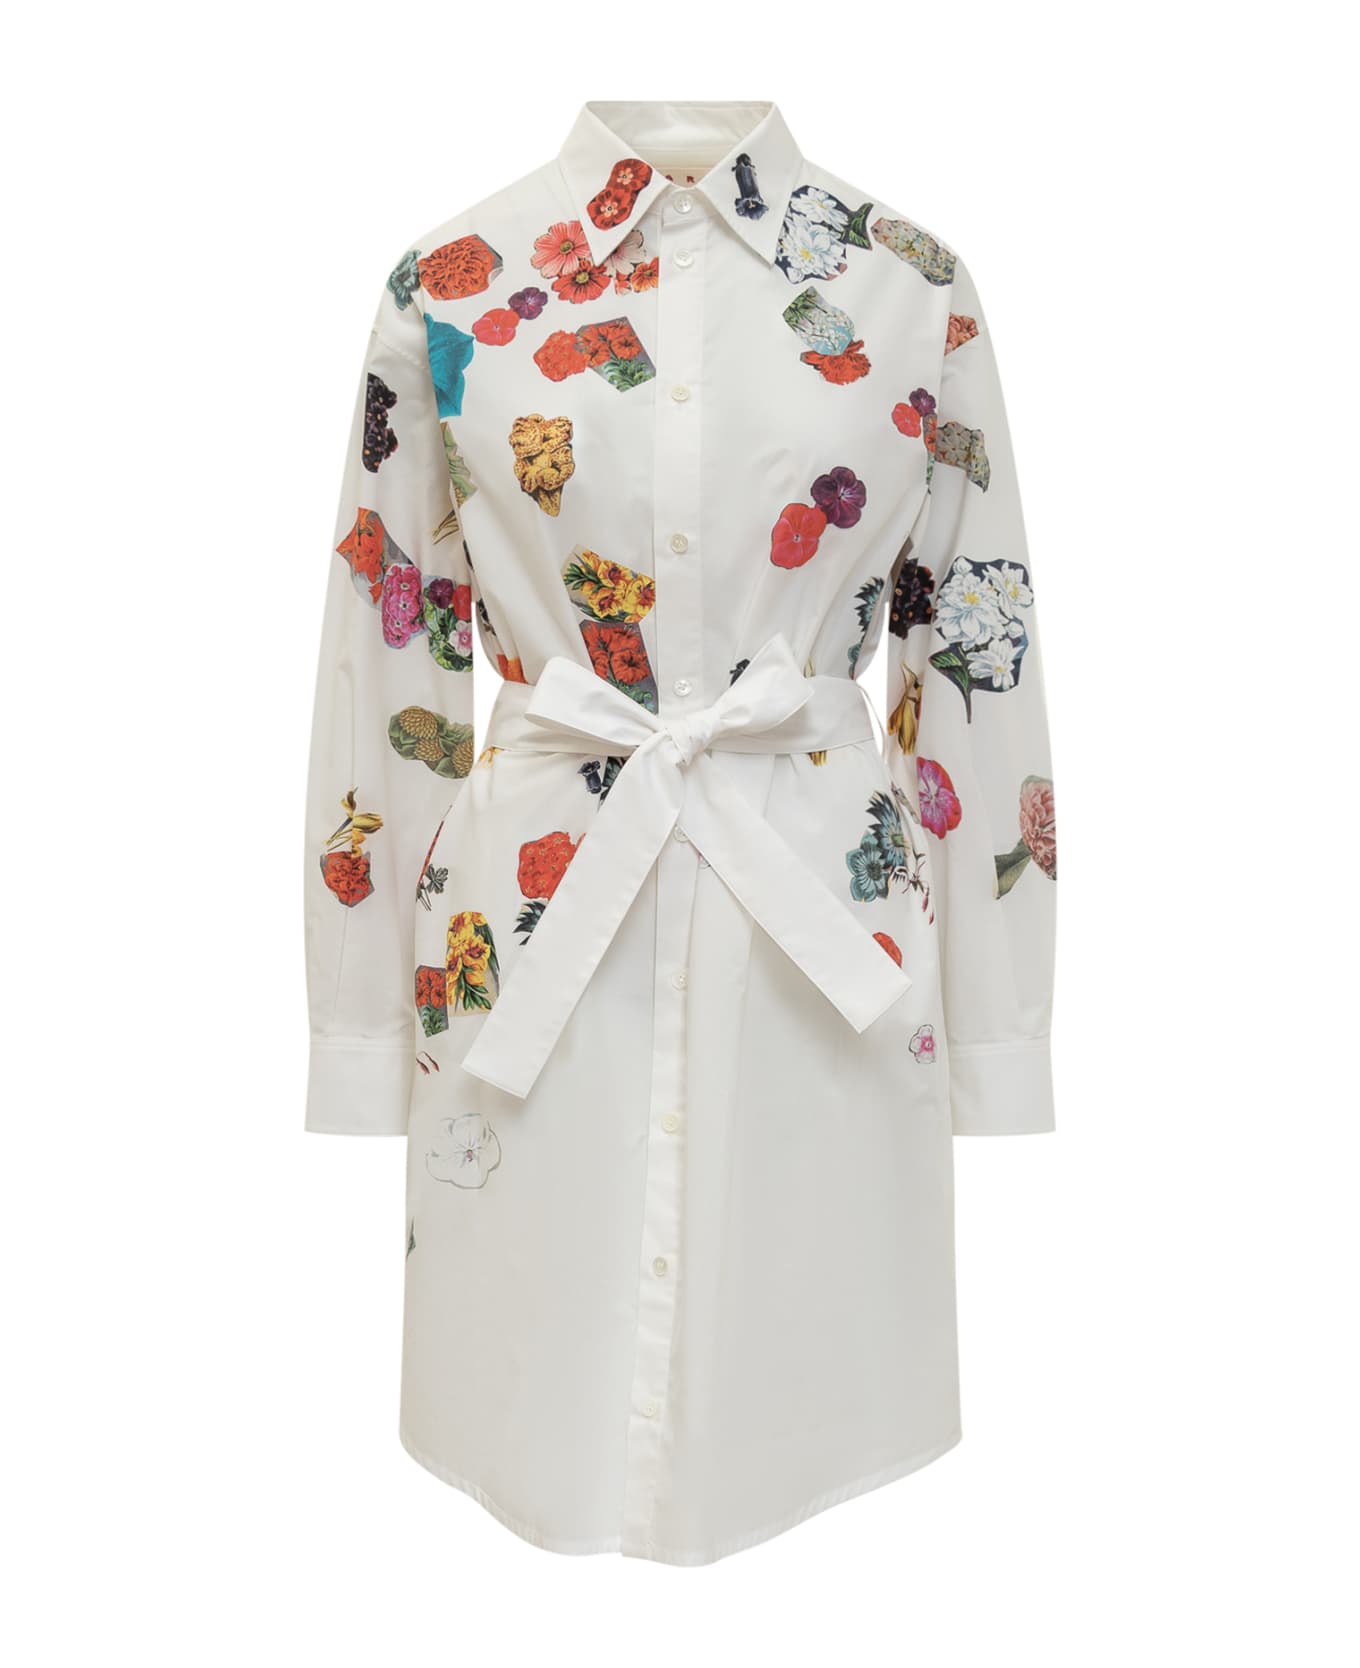 Marni Dress With Floral Patterned Embellishment - LILY WHITE ワンピース＆ドレス